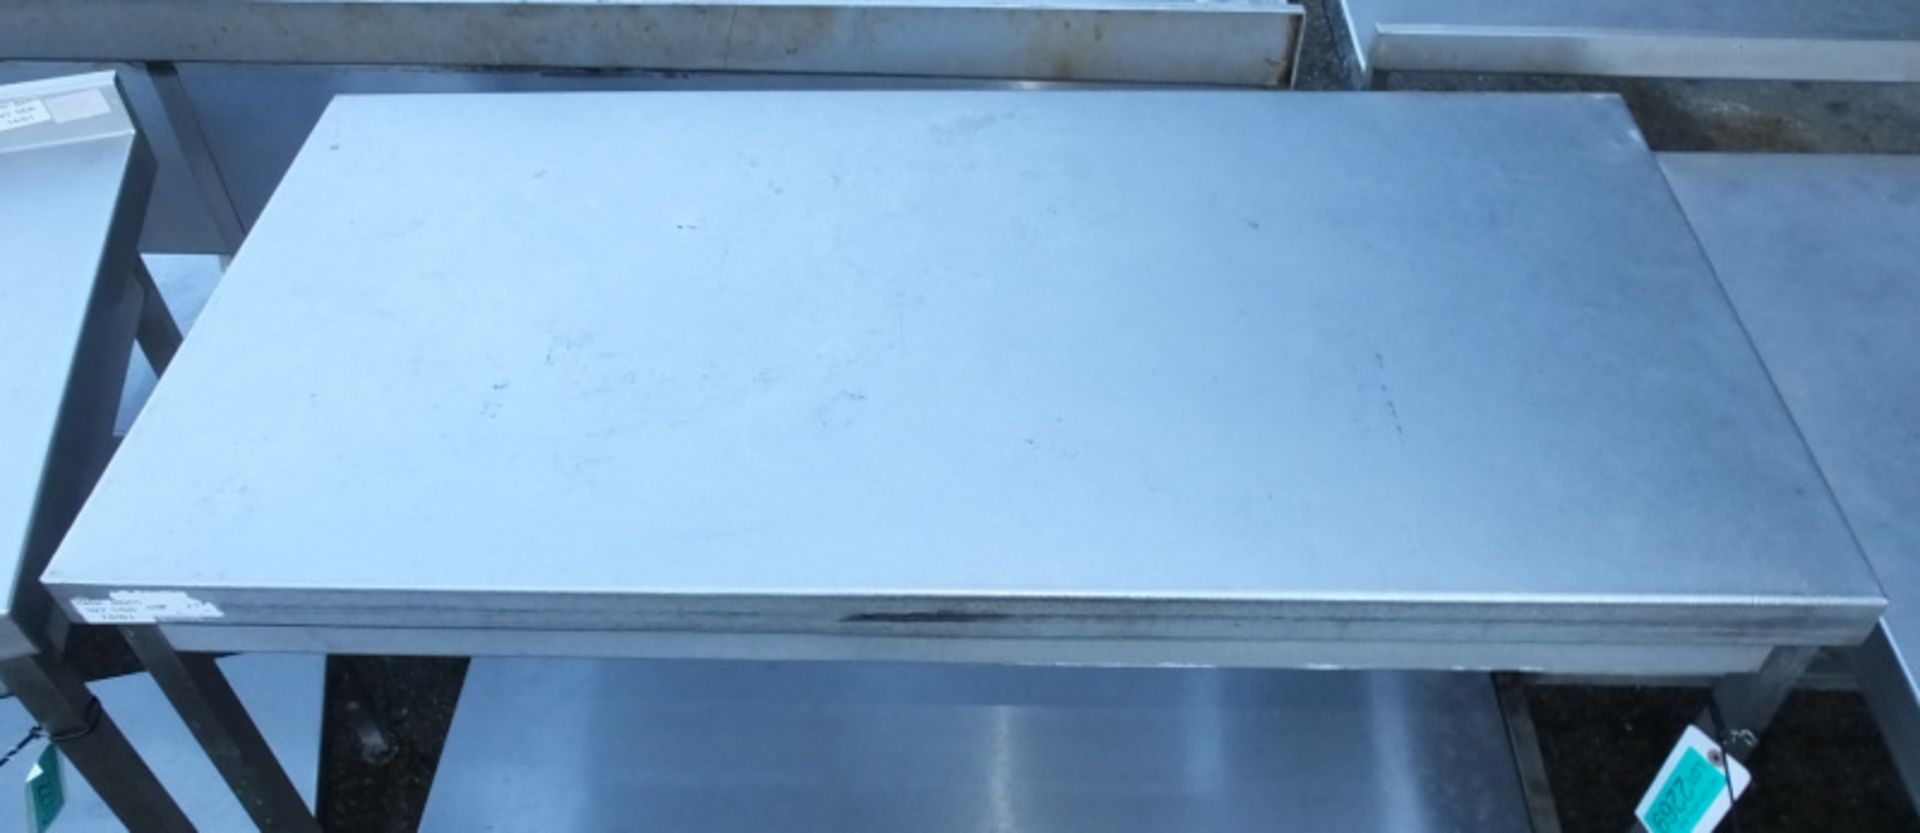 Stainless Steel Counter Work Top L 1200mm x W 600mm x H 920mm - Image 2 of 3